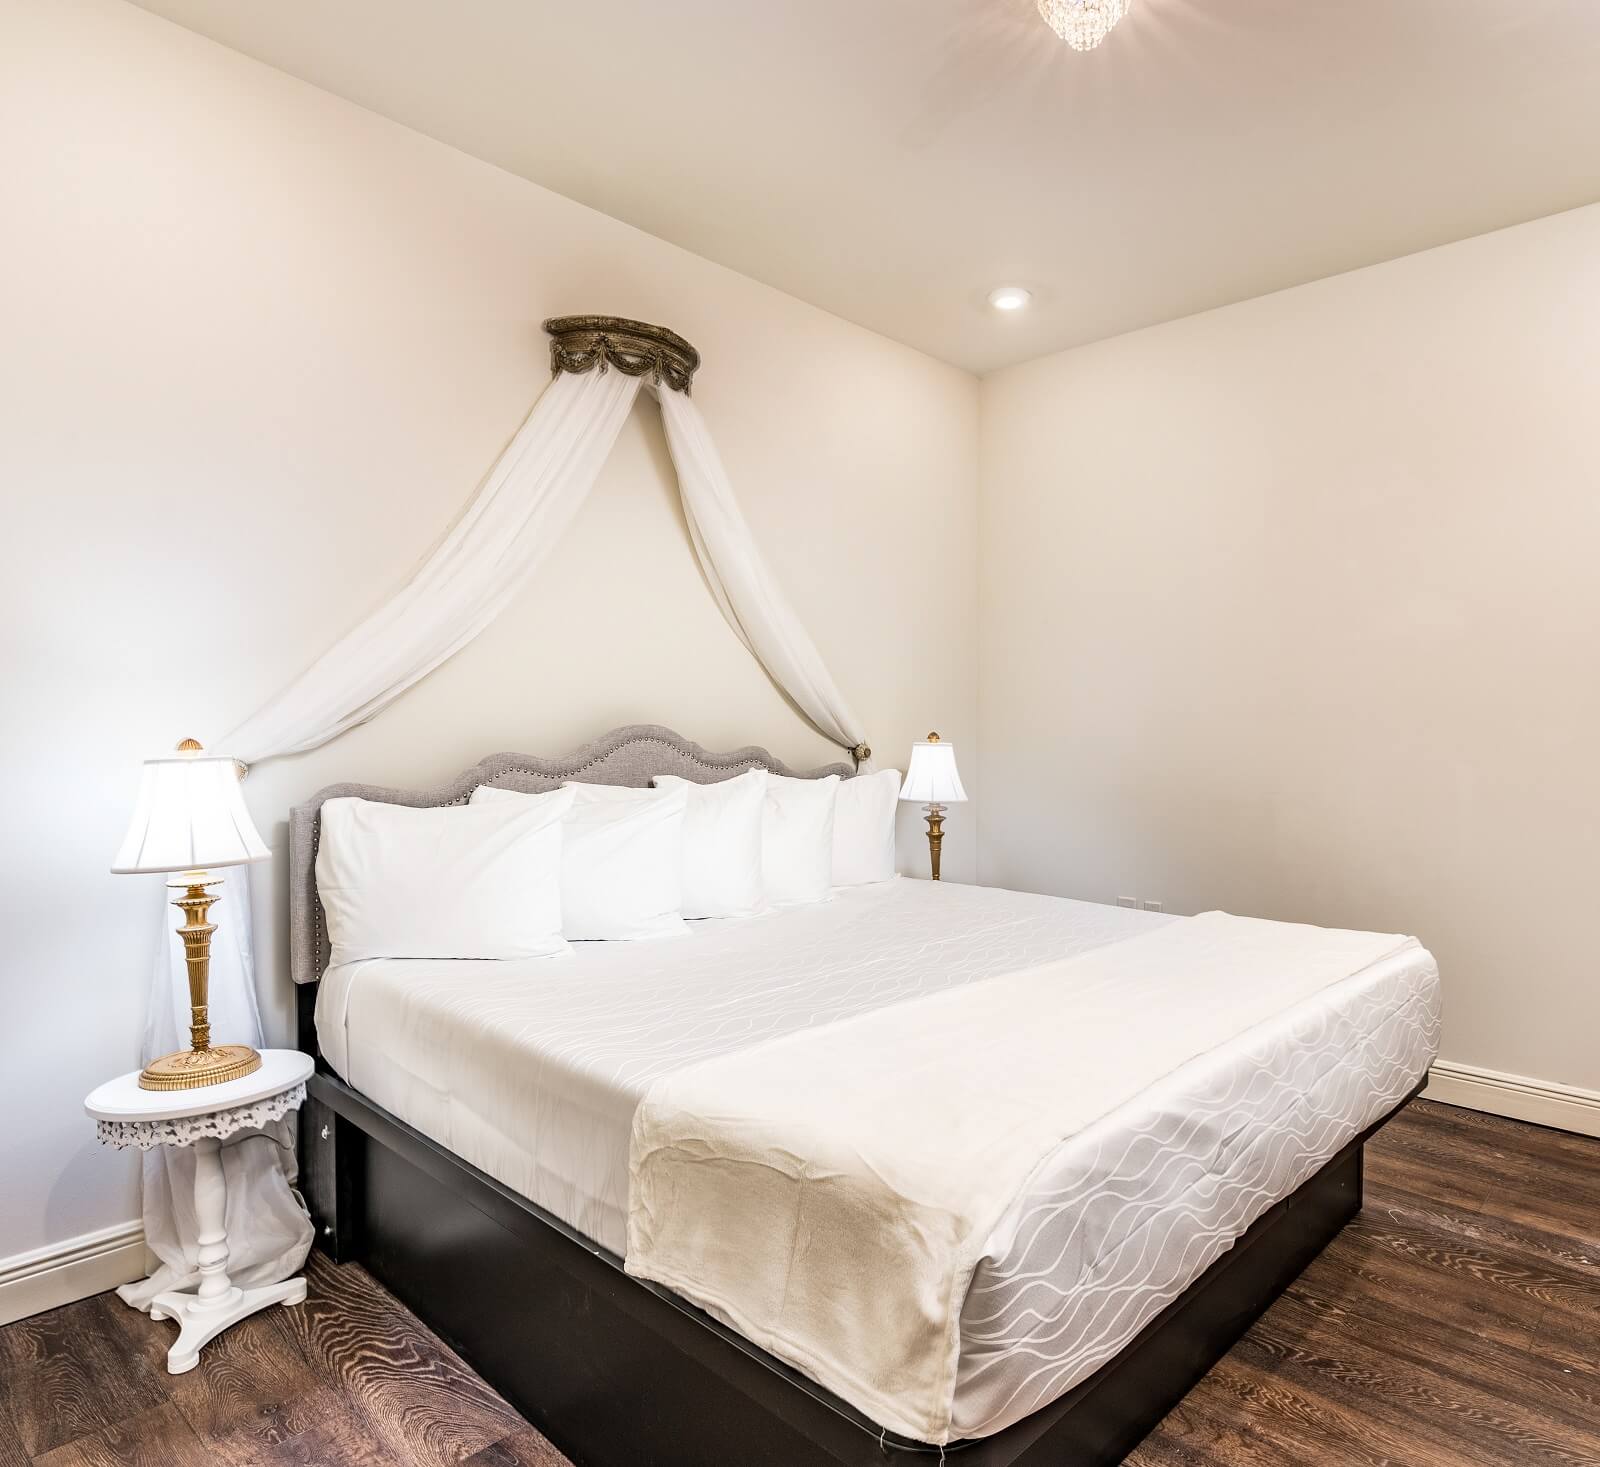 The Alexandre Unit 401 bedroom, a New Orleans luxury rental.